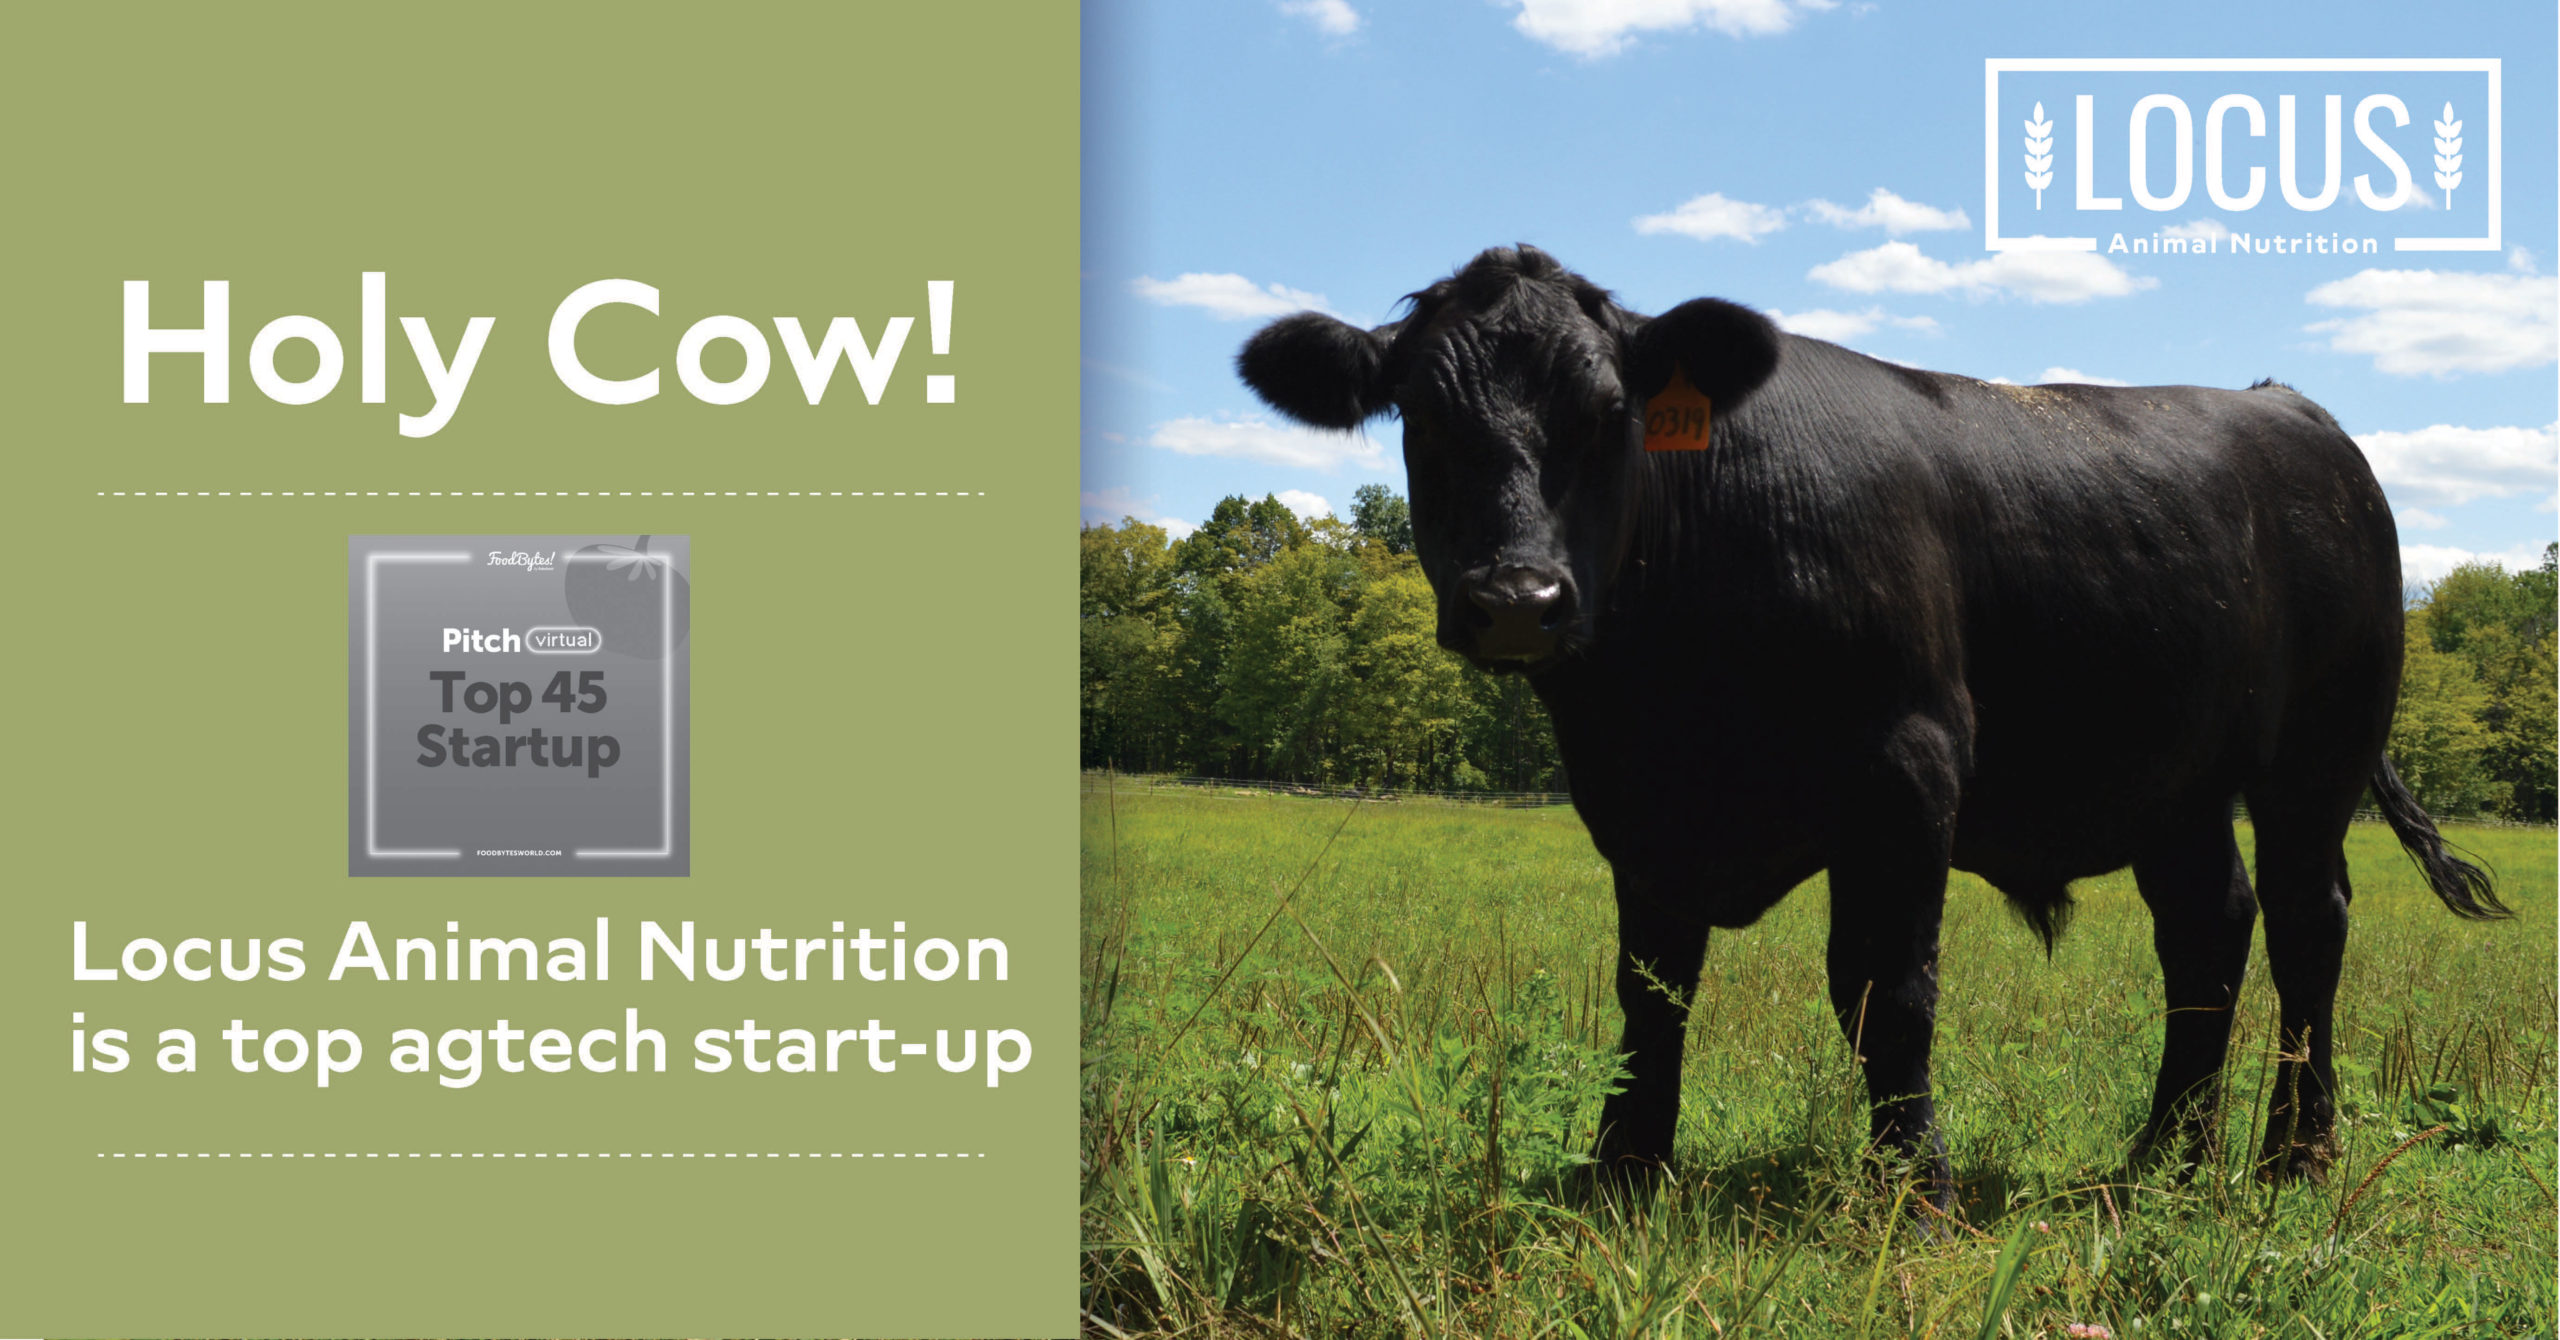 Rabobank Names Locus Animal Nutrition A Top Startup for Methane-Reducing Cattle Feed Additives